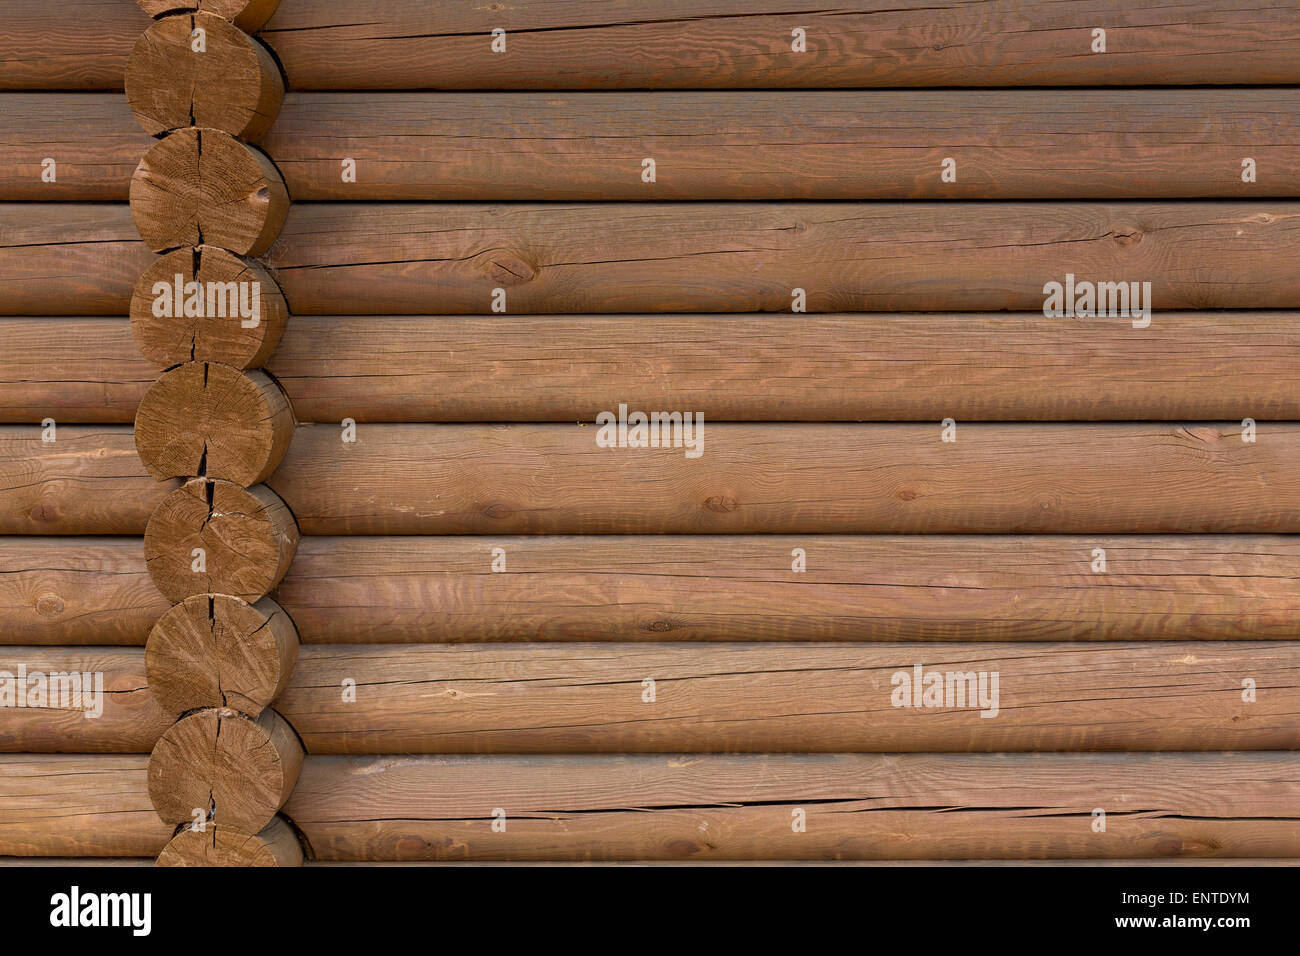 timbered wooden wall made from logs as background Stock Photo